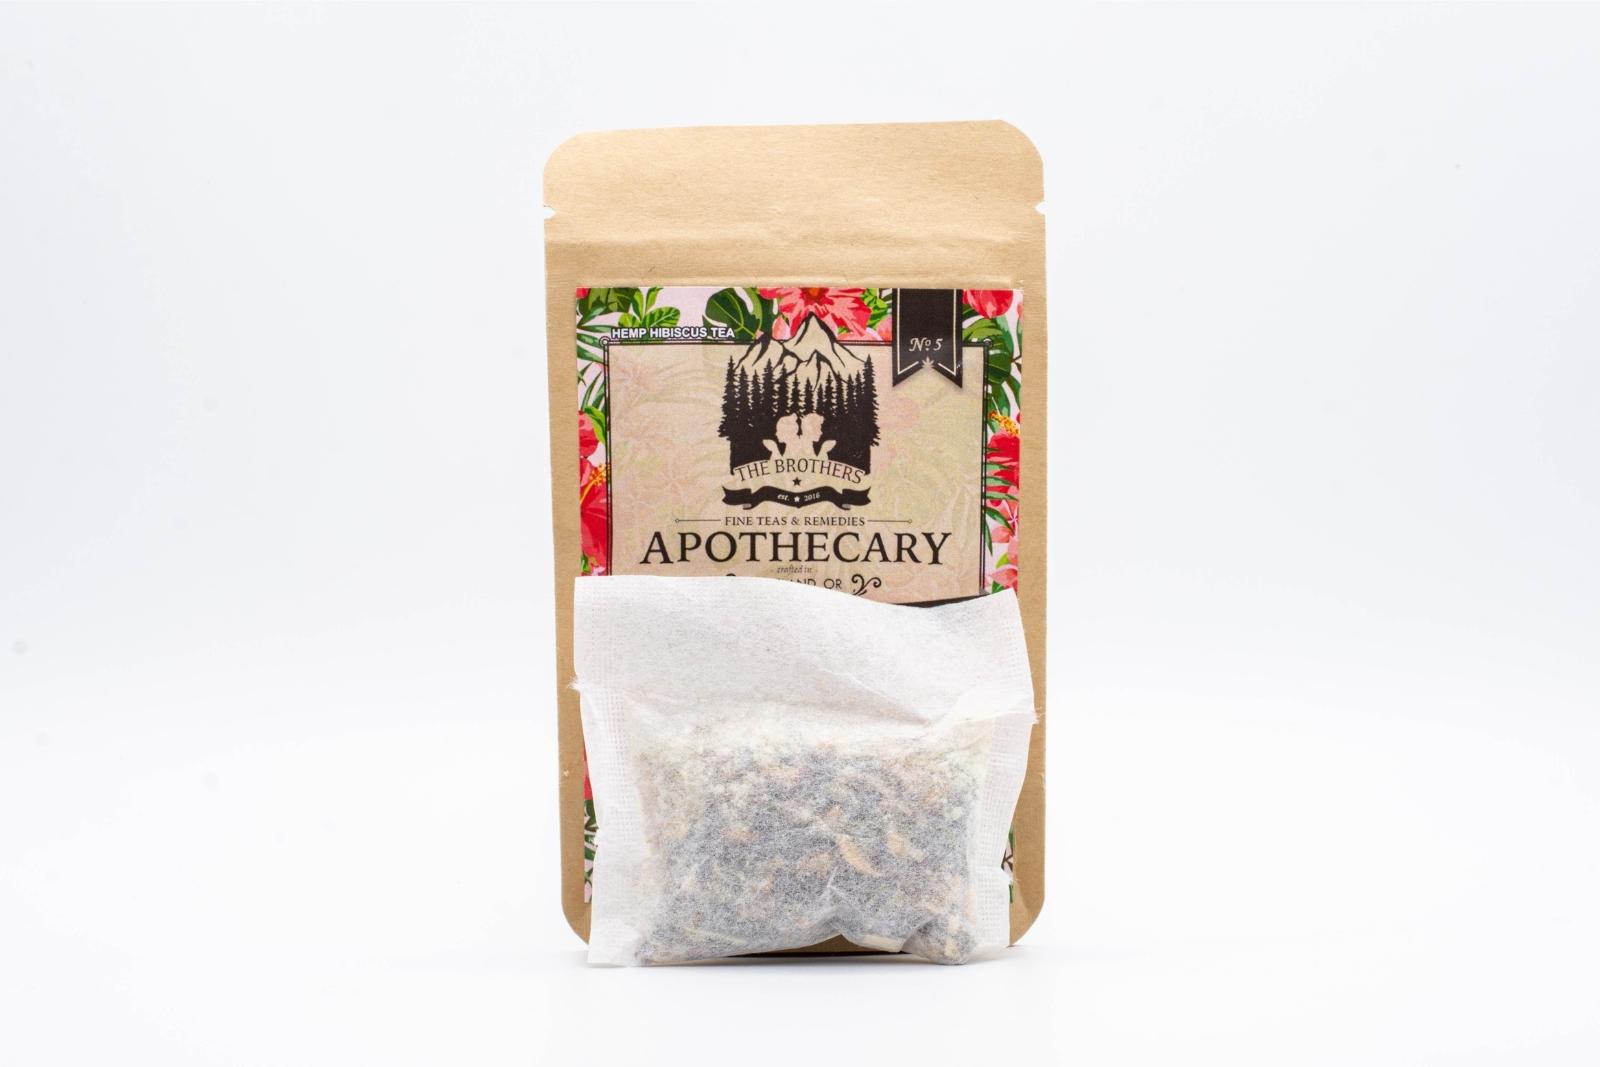 A tea bag in front of a small packet of The Brothers Apothecary's Highbiscus Tea on a white background